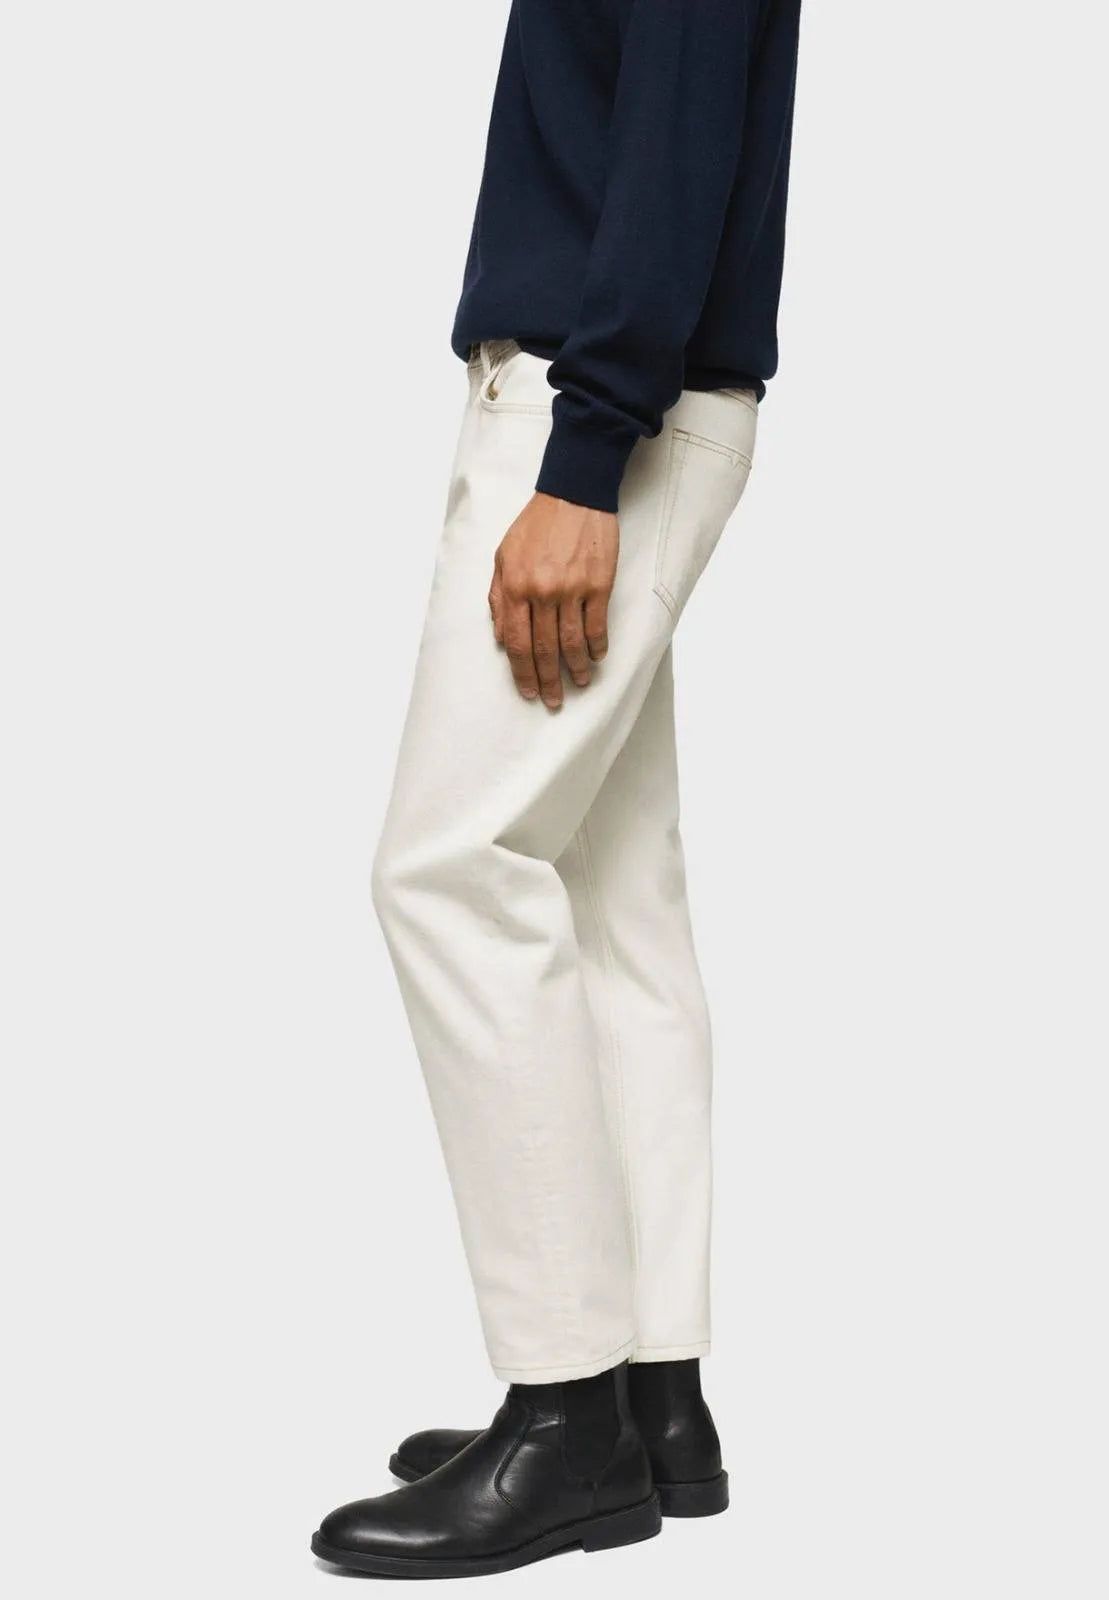 Mango Man White Jeans: Crisp & clean, straight-fit for a relaxed look (mention size if relevant).Straight-leg design complements different body types.rise wash, straight fit, relaxed, summer, versatile.